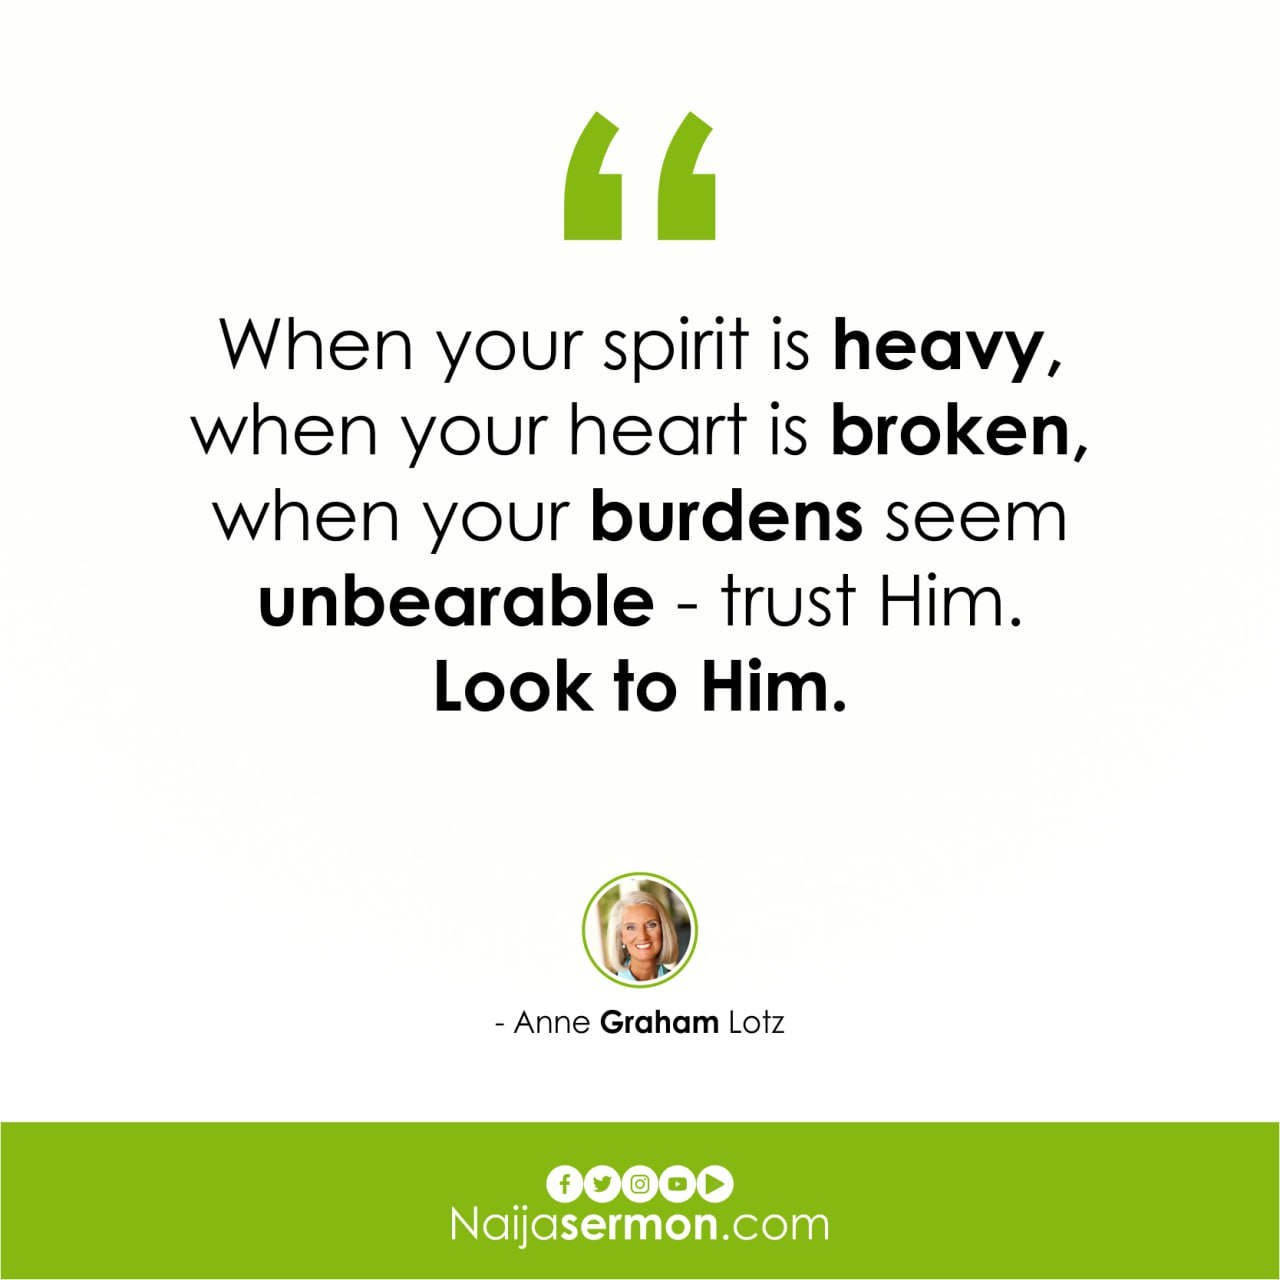 QUOTE OF THE DAY BY ANNE GRAHAM LOTZ 1